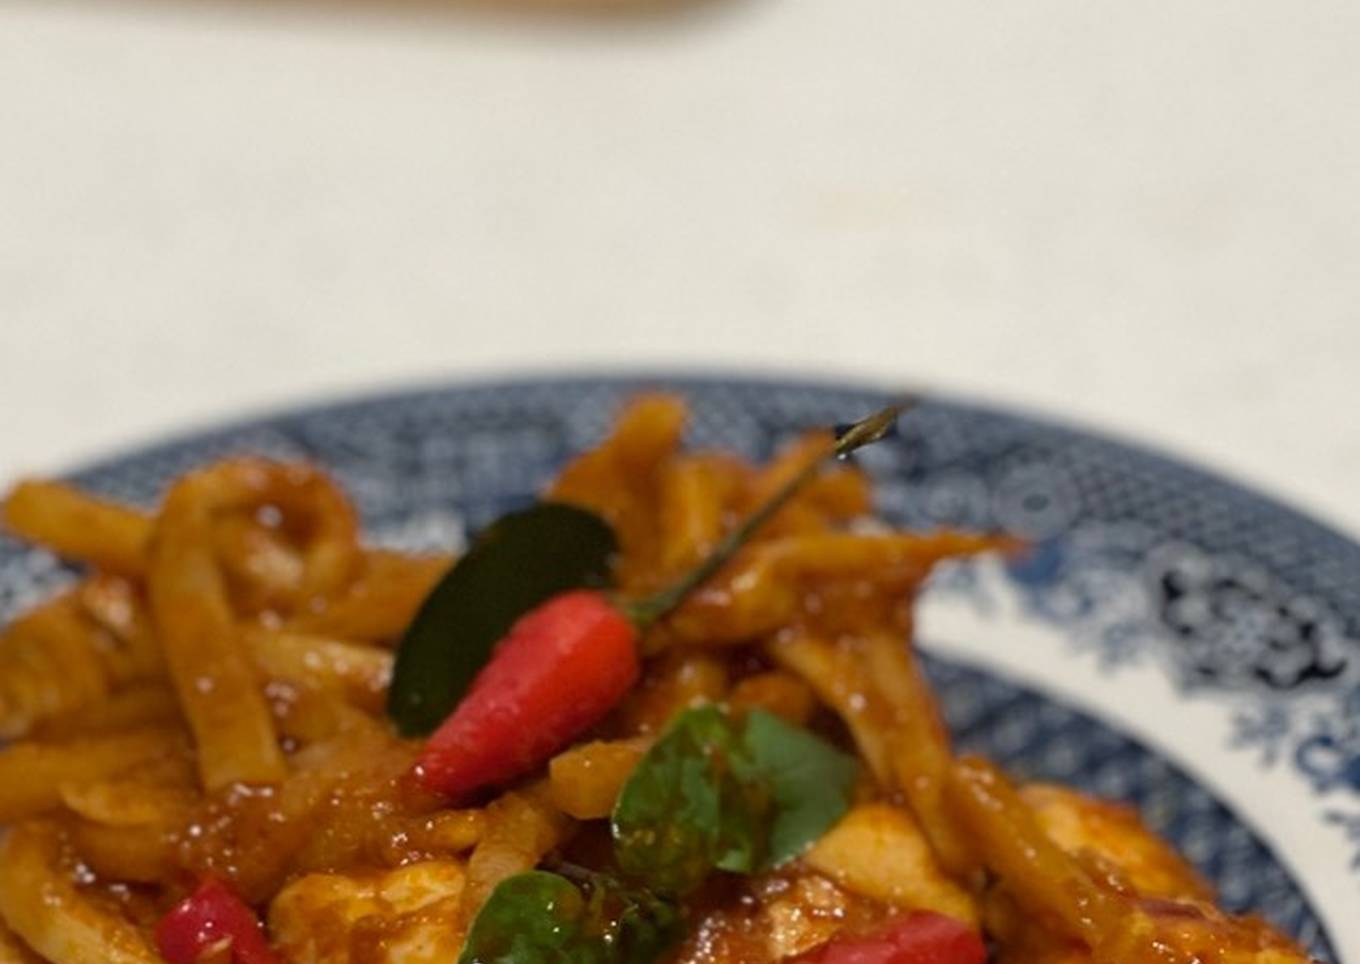 Stir-fry chicken red curry and bamboo shoot